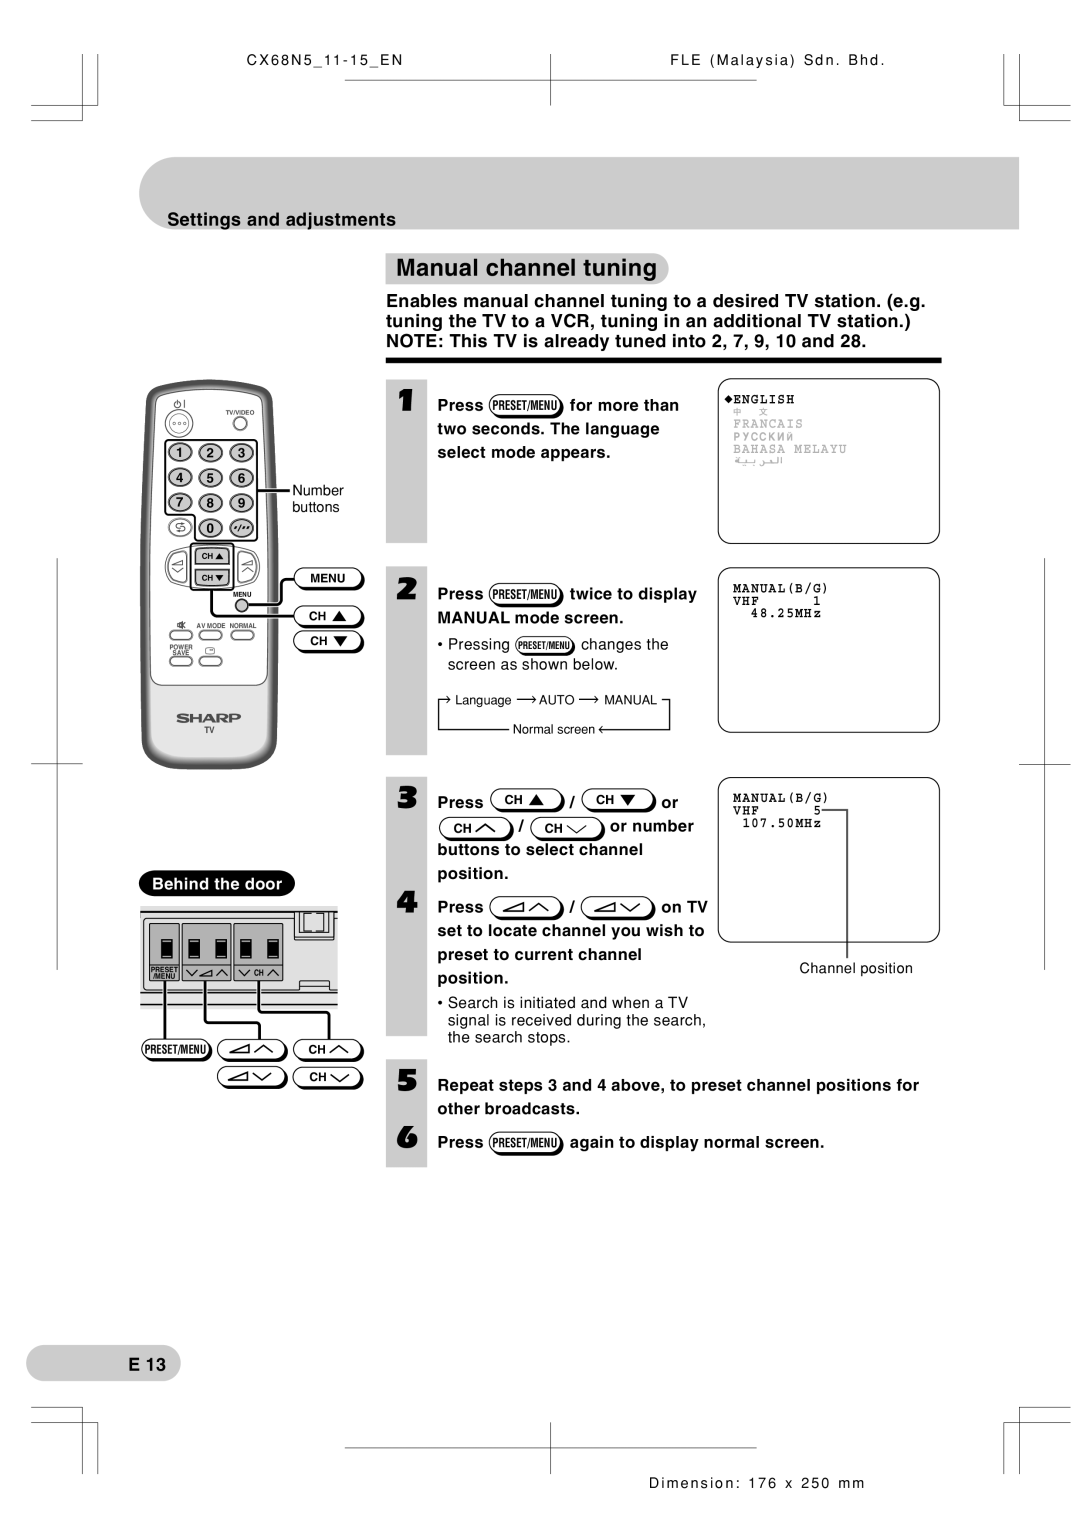 Sharp Cx68n5 operation manual Manual channel tuning, Settings and adjustments, Behind the door, Number, buttons 